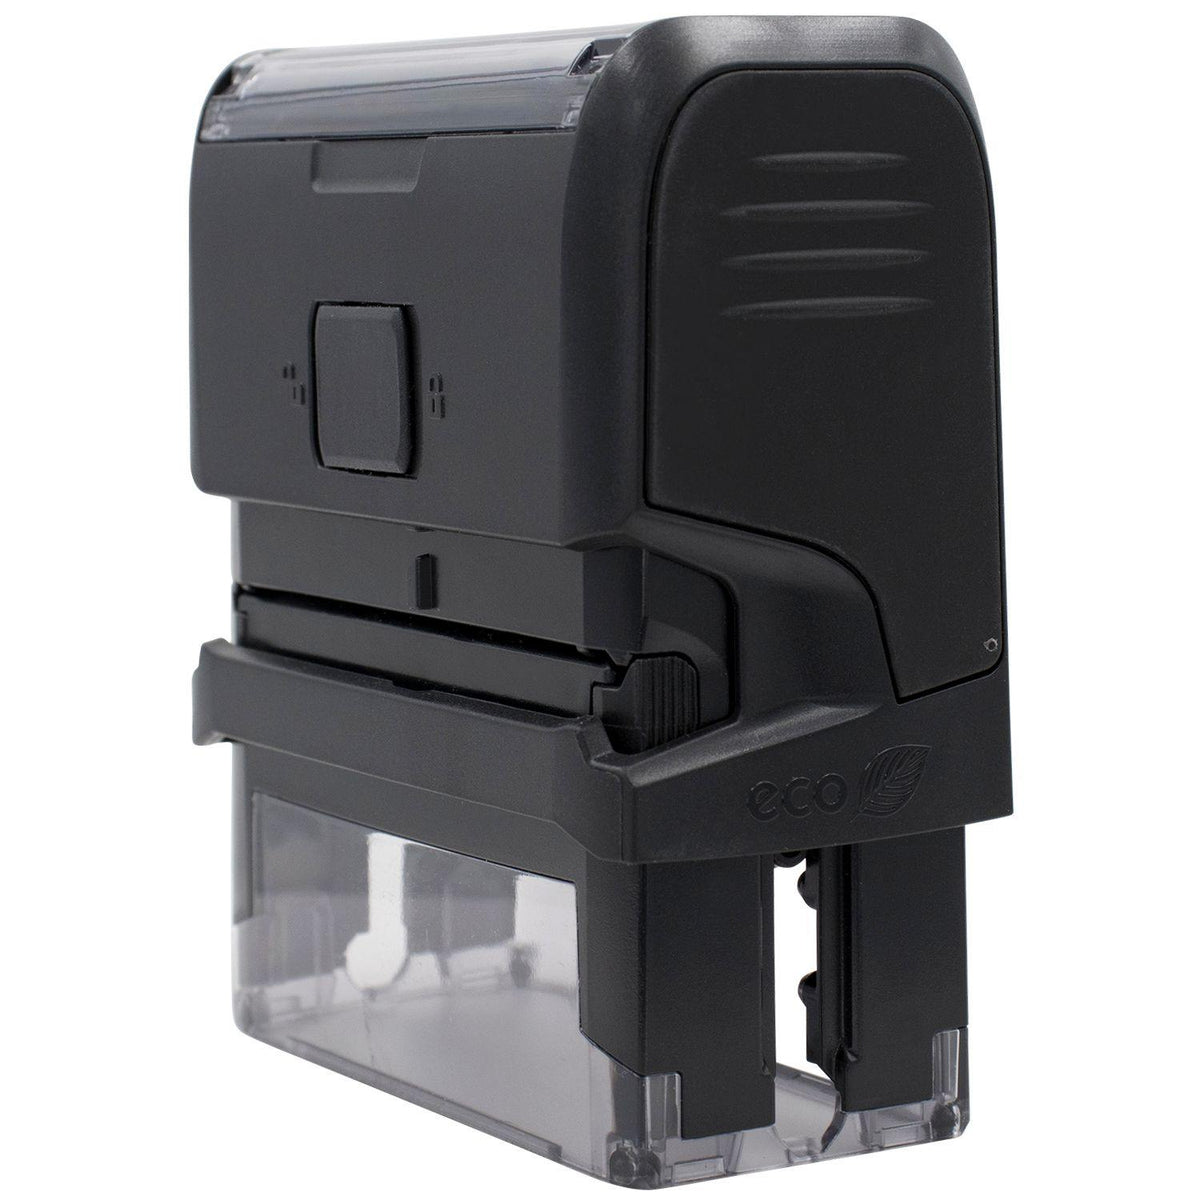 Self Inking Court Copy Stamp - Engineer Seal Stamps - Brand_Trodat, Impression Size_Small, Stamp Type_Self-Inking Stamp, Type of Use_Legal